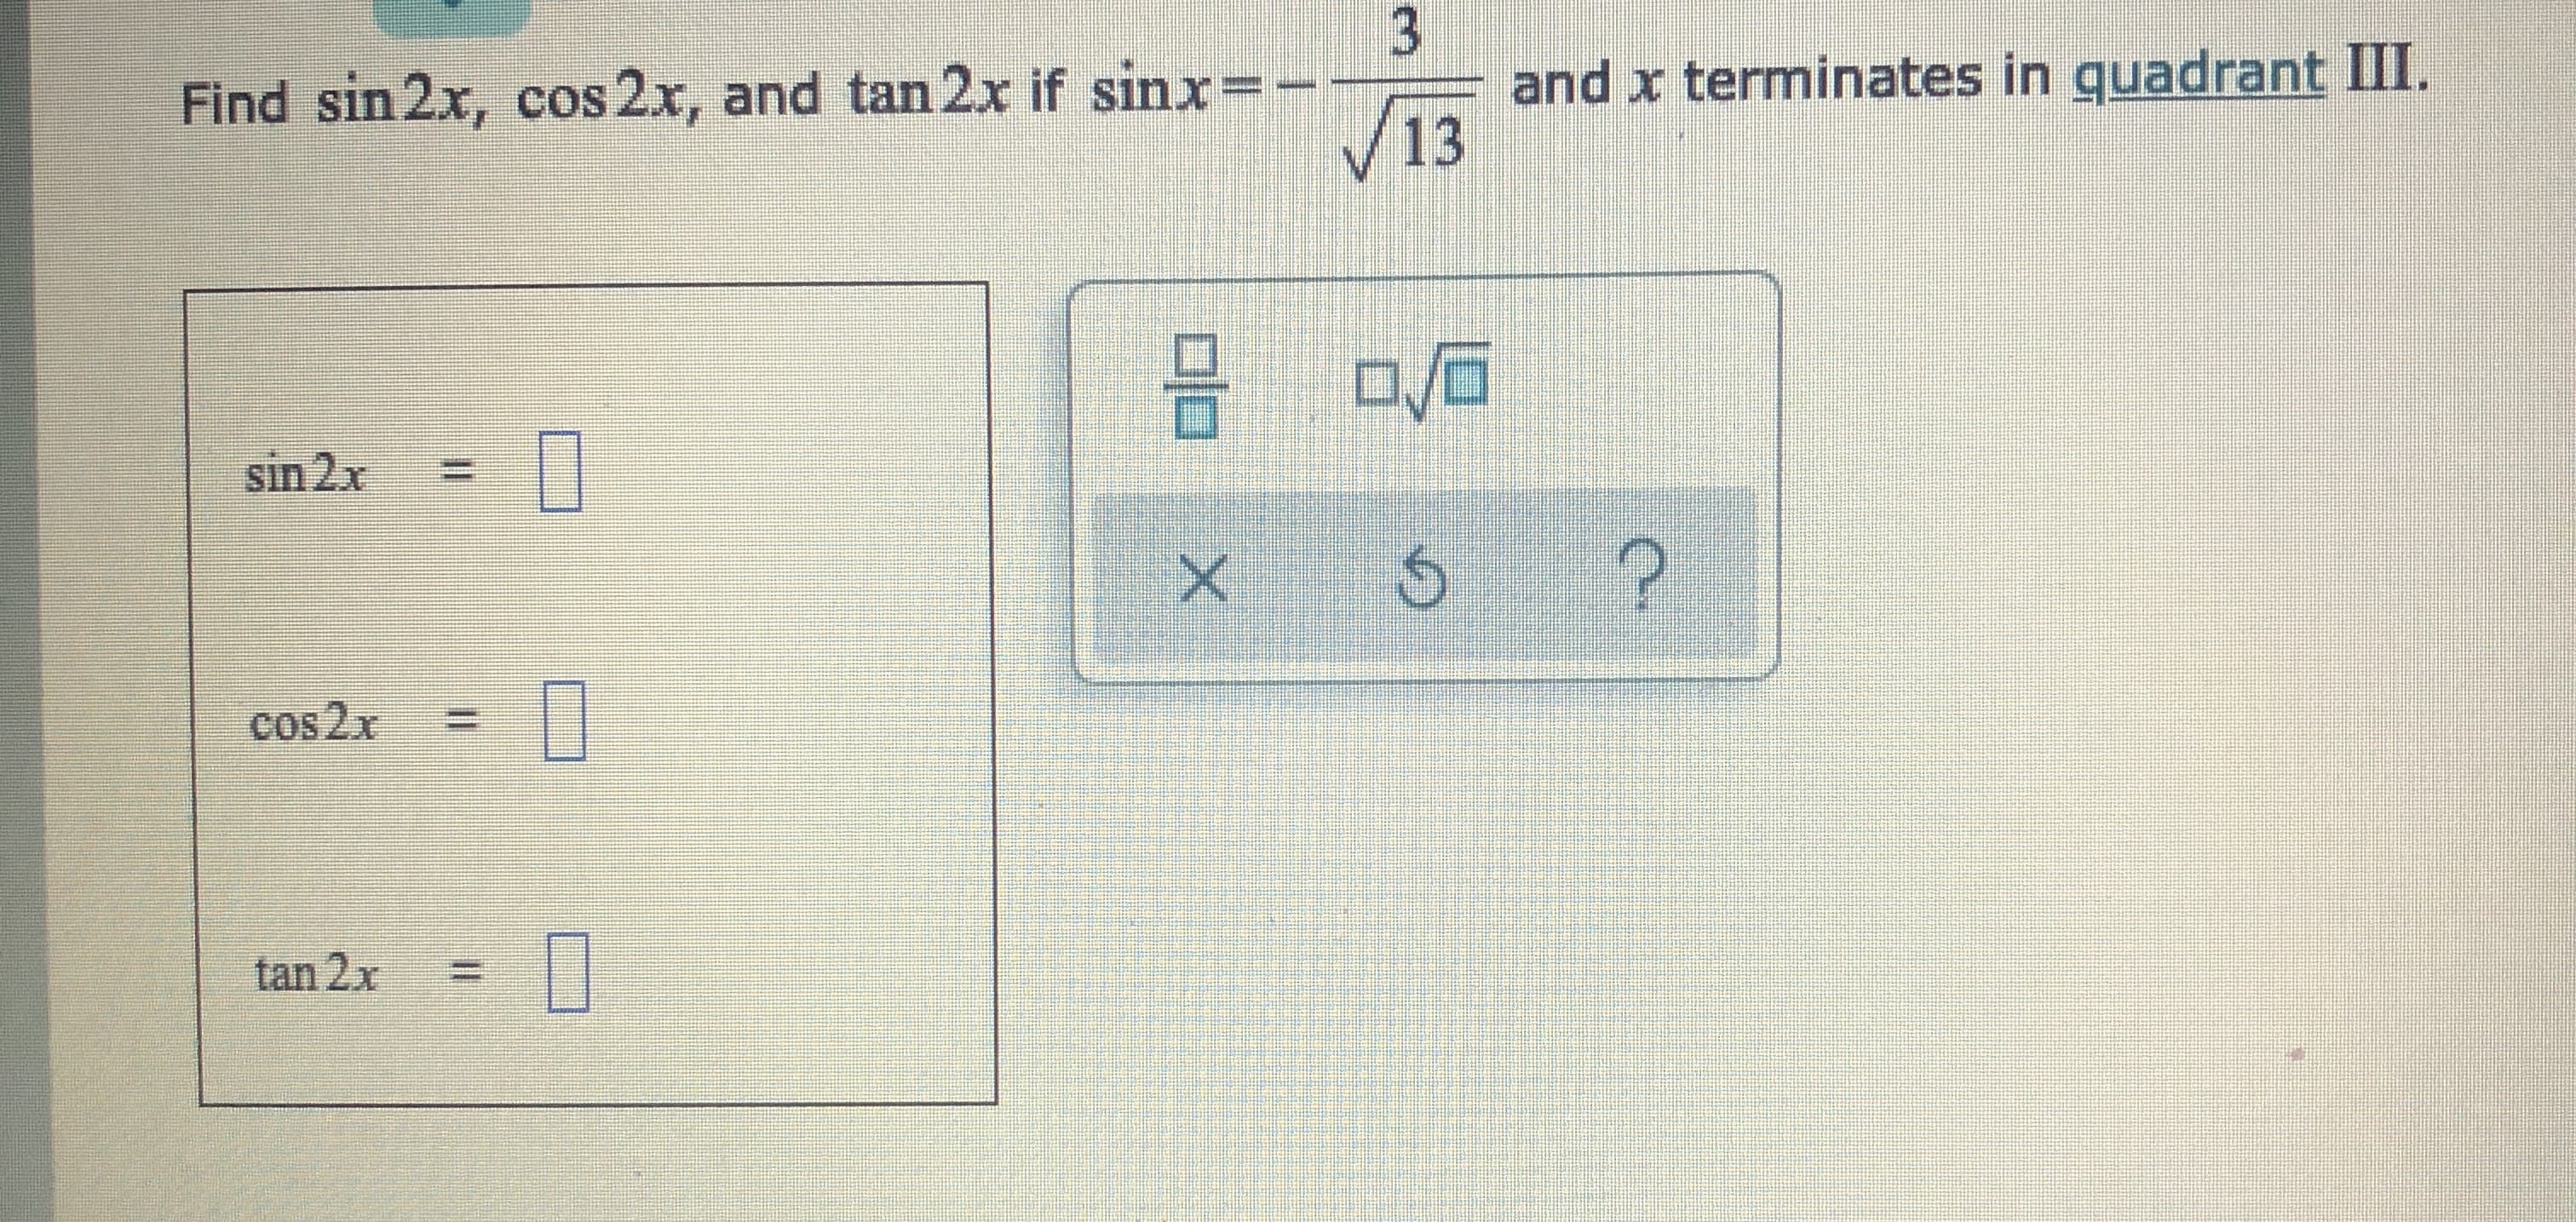 Find sin 2x, cos 2x, and tan 2x if sinx=
and x terminates in guadrant III.
V13
